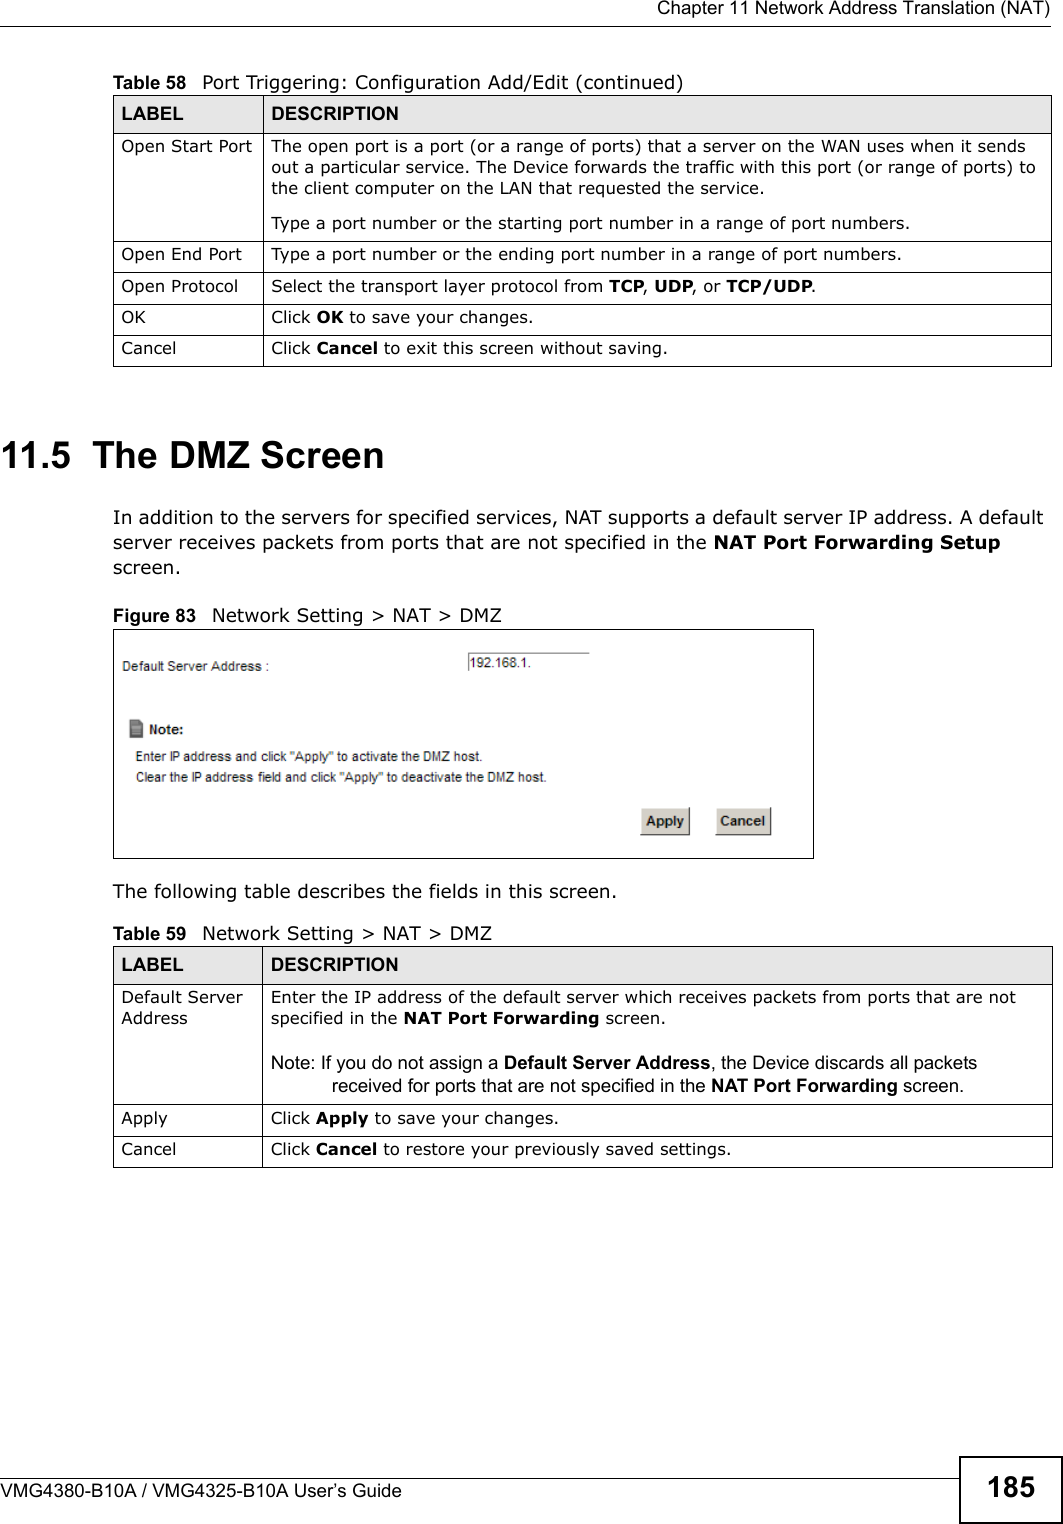  Chapter 11 Network Address Translation (NAT)VMG4380-B10A / VMG4325-B10A User’s Guide 18511.5  The DMZ ScreenIn addition to the servers for specified services, NAT supports a default server IP address. A default server receives packets from ports that are not specified in the NAT Port Forwarding Setupscreen.Figure 83   Network Setting &gt; NAT &gt; DMZ The following table describes the fields in this screen. Open Start Port The open port is a port (or a range of ports) that a server on the WAN uses when it sends out a particular service. The Device forwards the traffic with this port (or range of ports) tothe client computer on the LAN that requested the service.Type a port number or the starting port number in a range of port numbers.Open End Port  Type a port number or the ending port number in a range of port numbers.Open Protocol Select the transport layer protocol from TCP, UDP, or TCP/UDP.OK Click OK to save your changes.Cancel Click Cancel to exit this screen without saving.Table 58   Port Triggering: Configuration Add/Edit (continued)LABEL DESCRIPTIONTable 59   Network Setting &gt; NAT &gt; DMZLABEL DESCRIPTIONDefault ServerAddressEnter the IP address of the default server which receives packets from ports that are notspecified in the NAT Port Forwarding screen. Note: If you do not assign a Default Server Address, the Device discards all packetsreceived for ports that are not specified in the NAT Port Forwarding screen.Apply Click Apply to save your changes.Cancel Click Cancel to restore your previously saved settings.